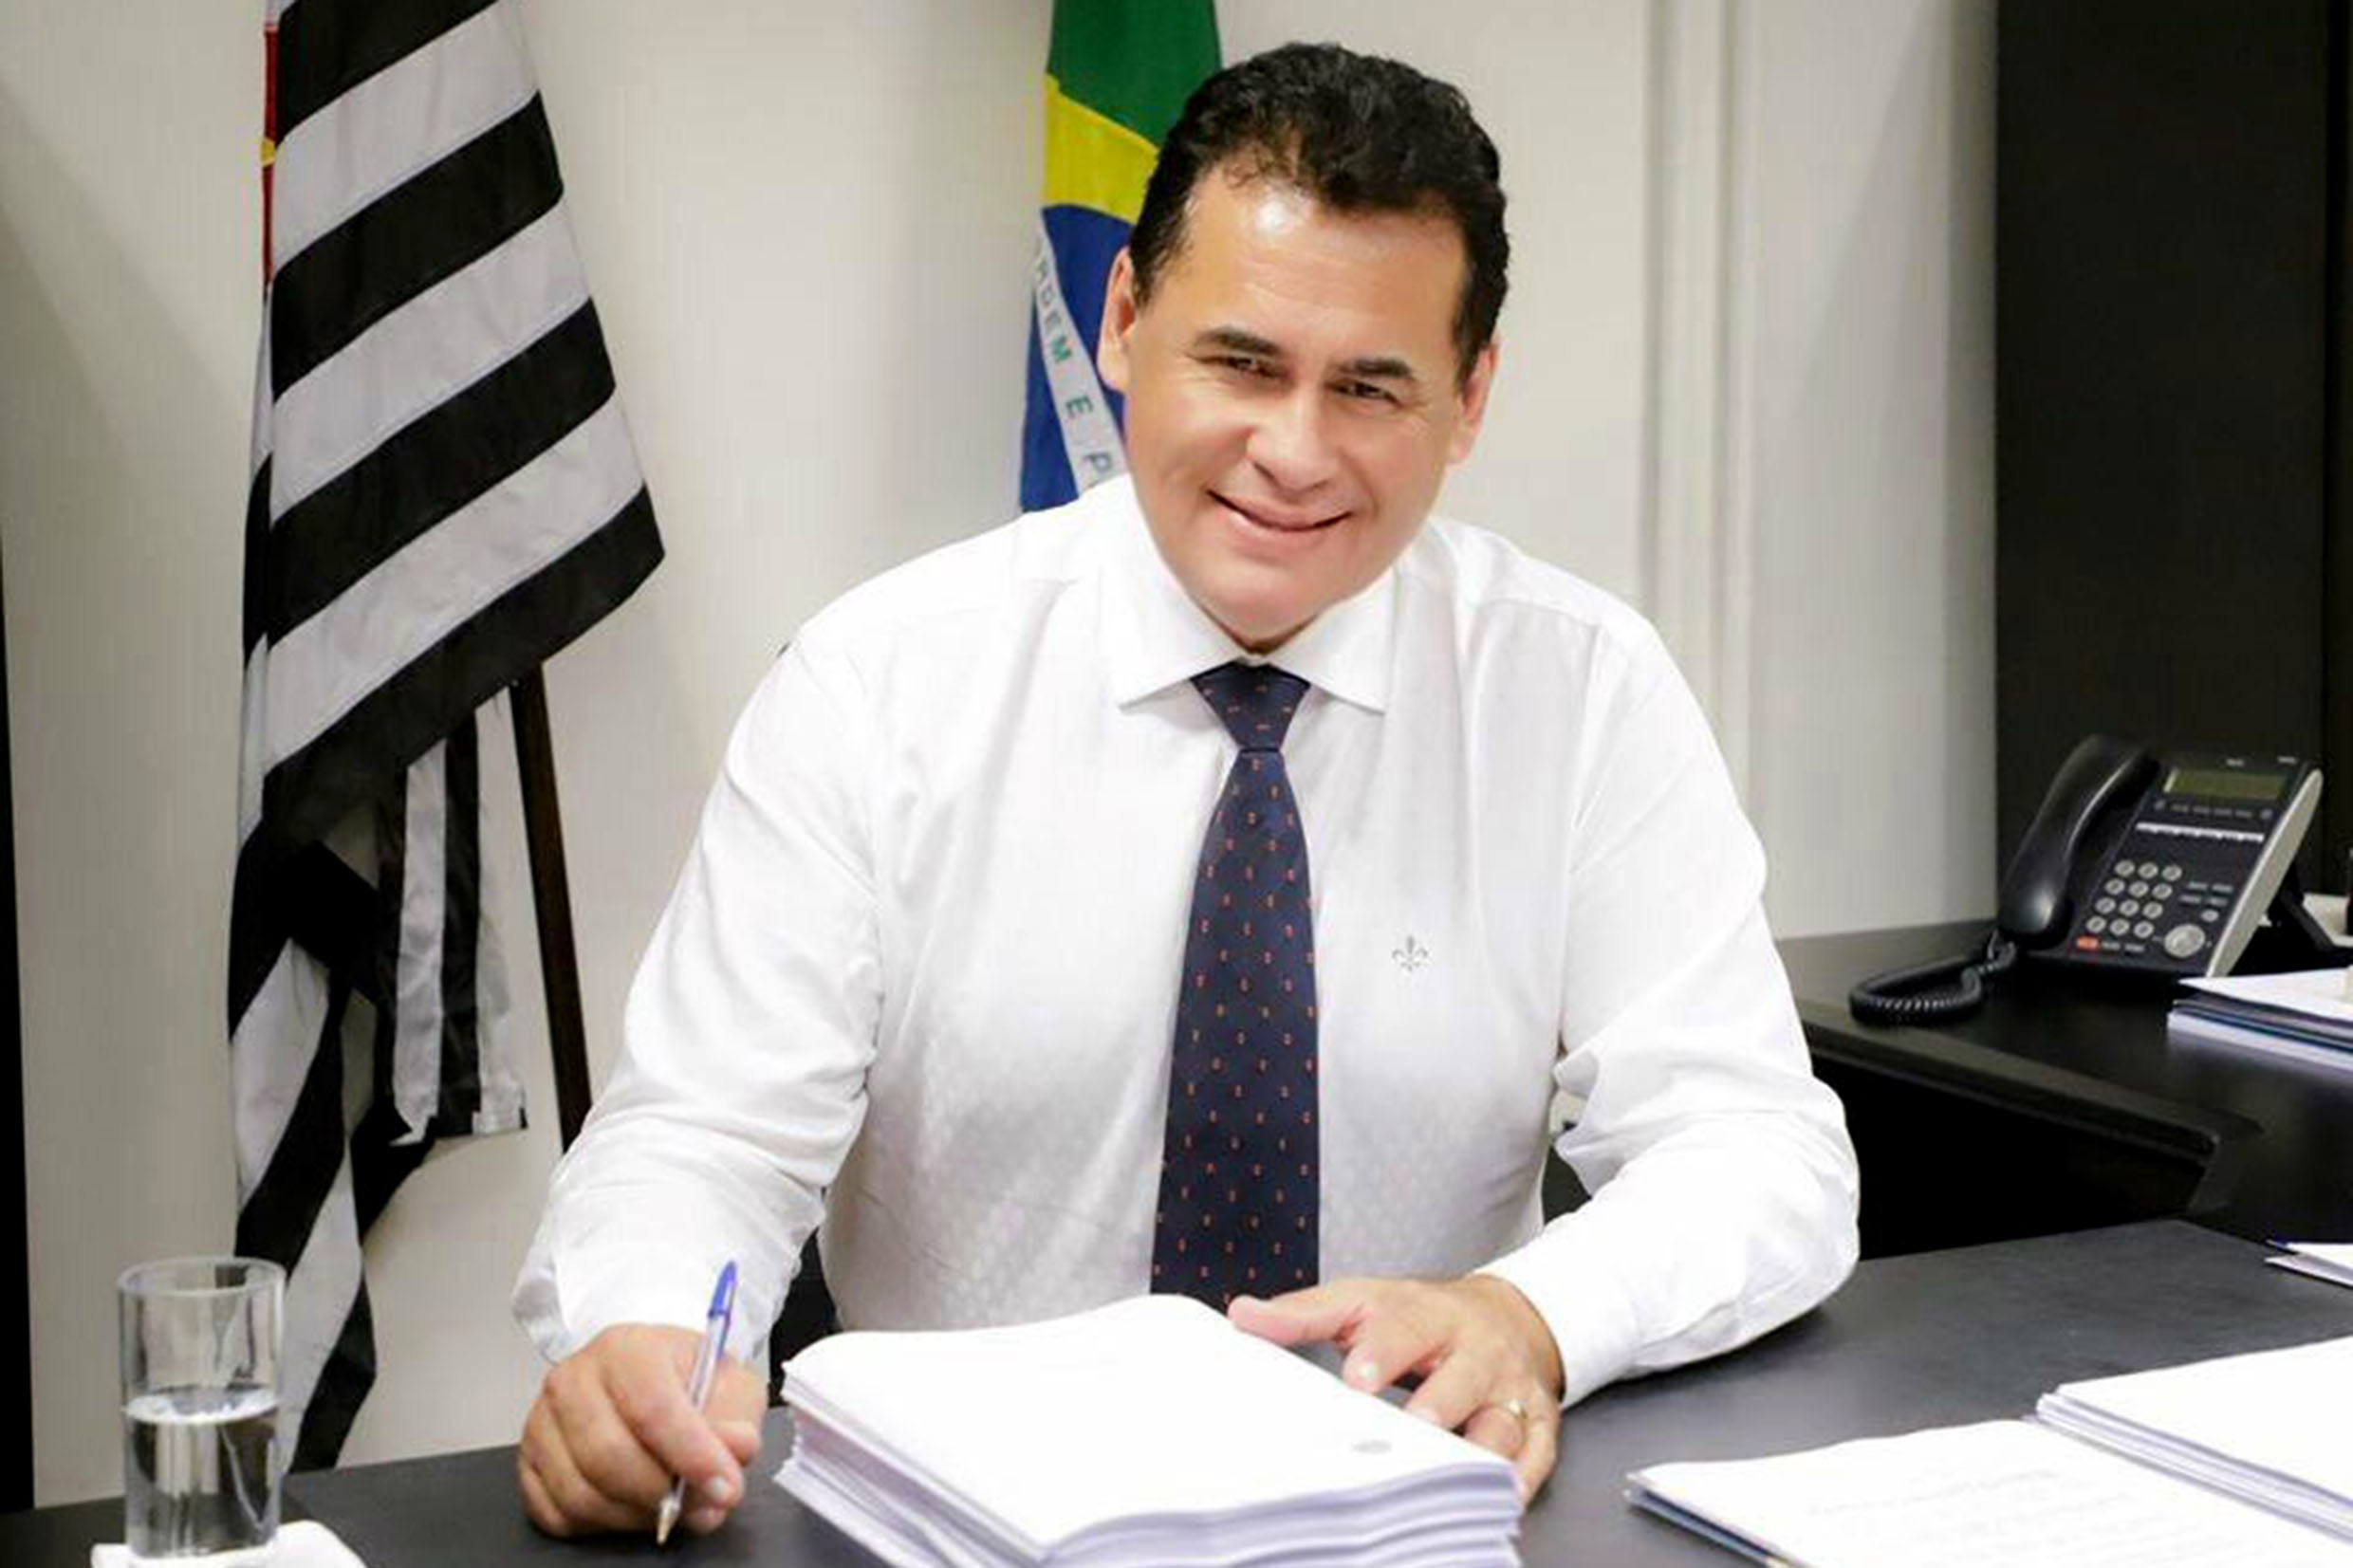 Jorge Wilson Xerife do Consumidor<a style='float:right' href='https://www3.al.sp.gov.br/repositorio/noticia/N-08-2020/fg252283.jpg' target=_blank><img src='/_img/material-file-download-white.png' width='14px' alt='Clique para baixar a imagem'></a>